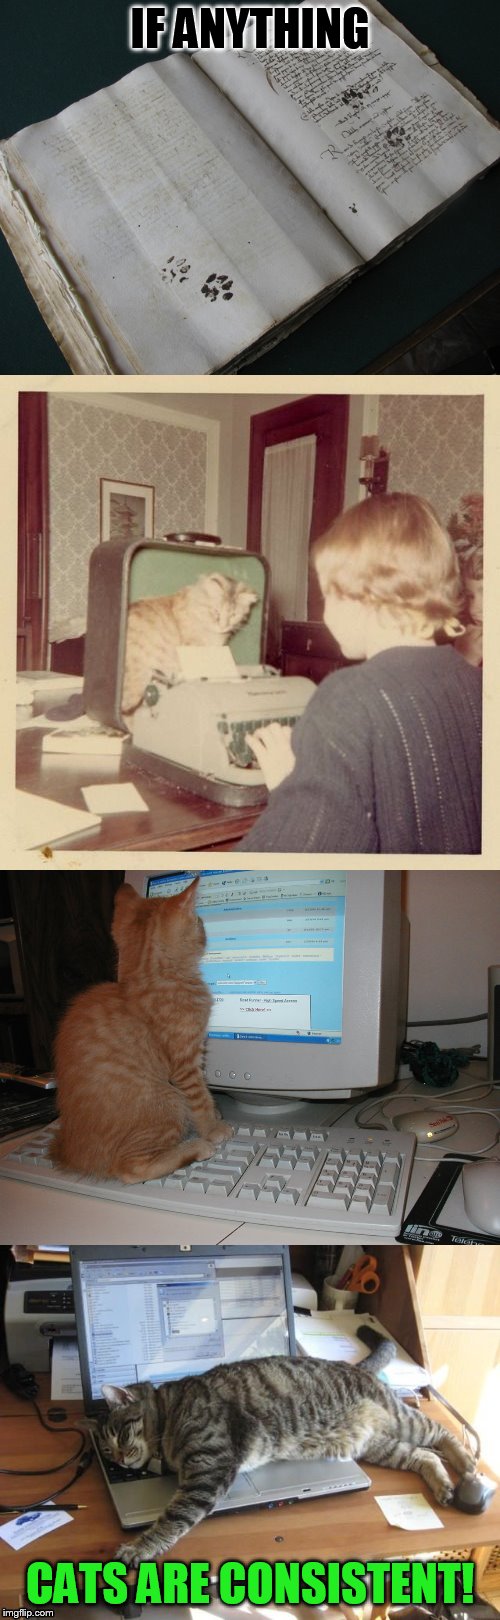 Something's don't change!  | IF ANYTHING; CATS ARE CONSISTENT! | image tagged in memes,cats,consistant,typewriter,old books,computers | made w/ Imgflip meme maker